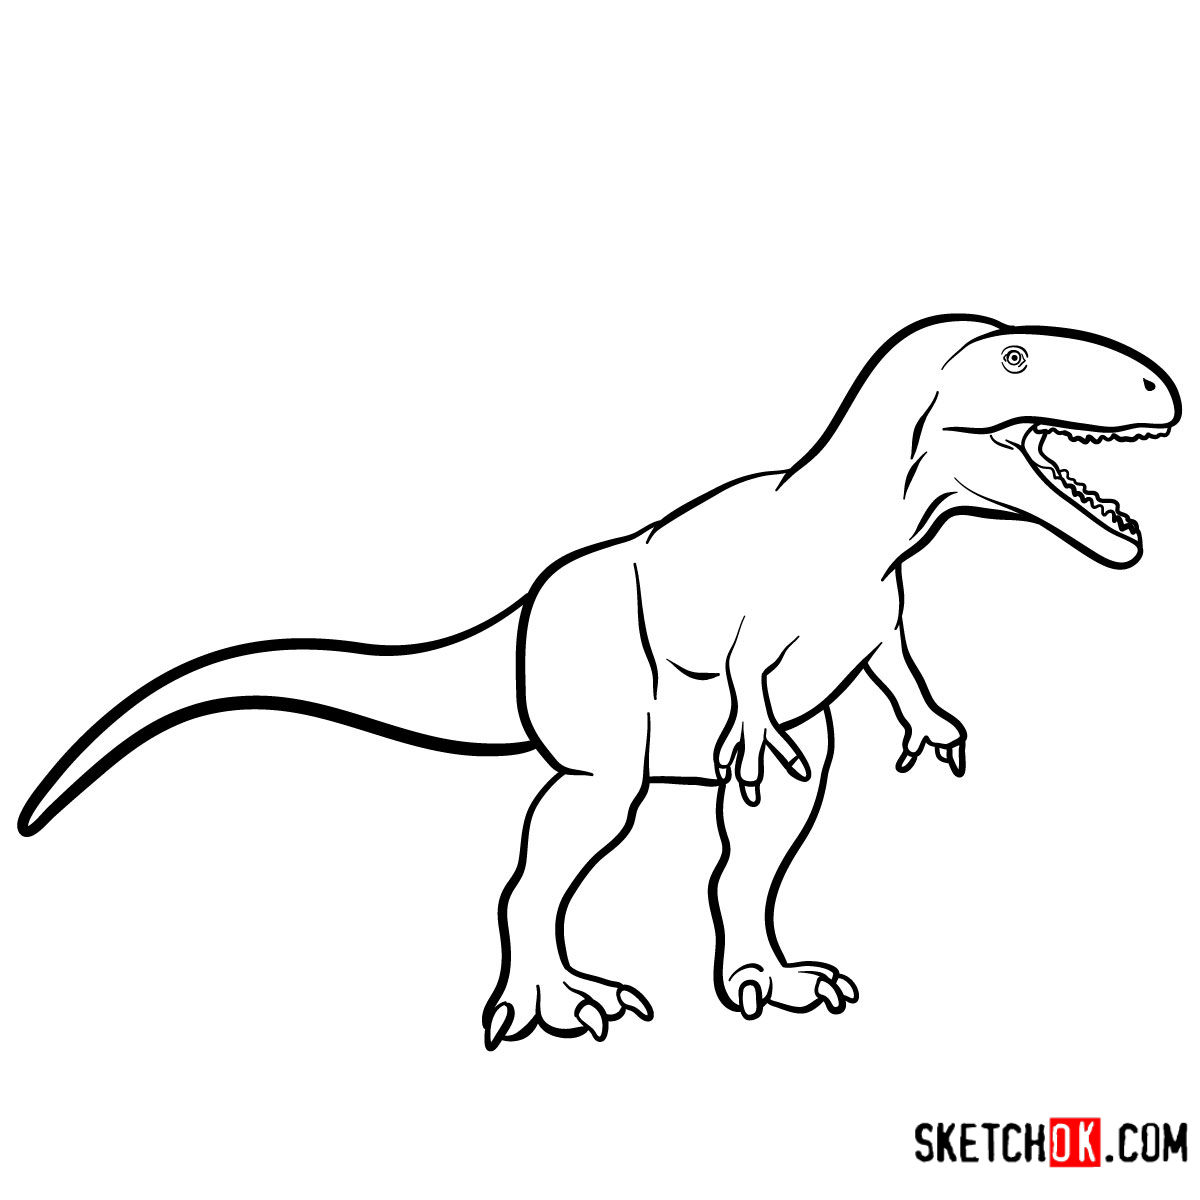 How to draw a Carcharodontosaurus